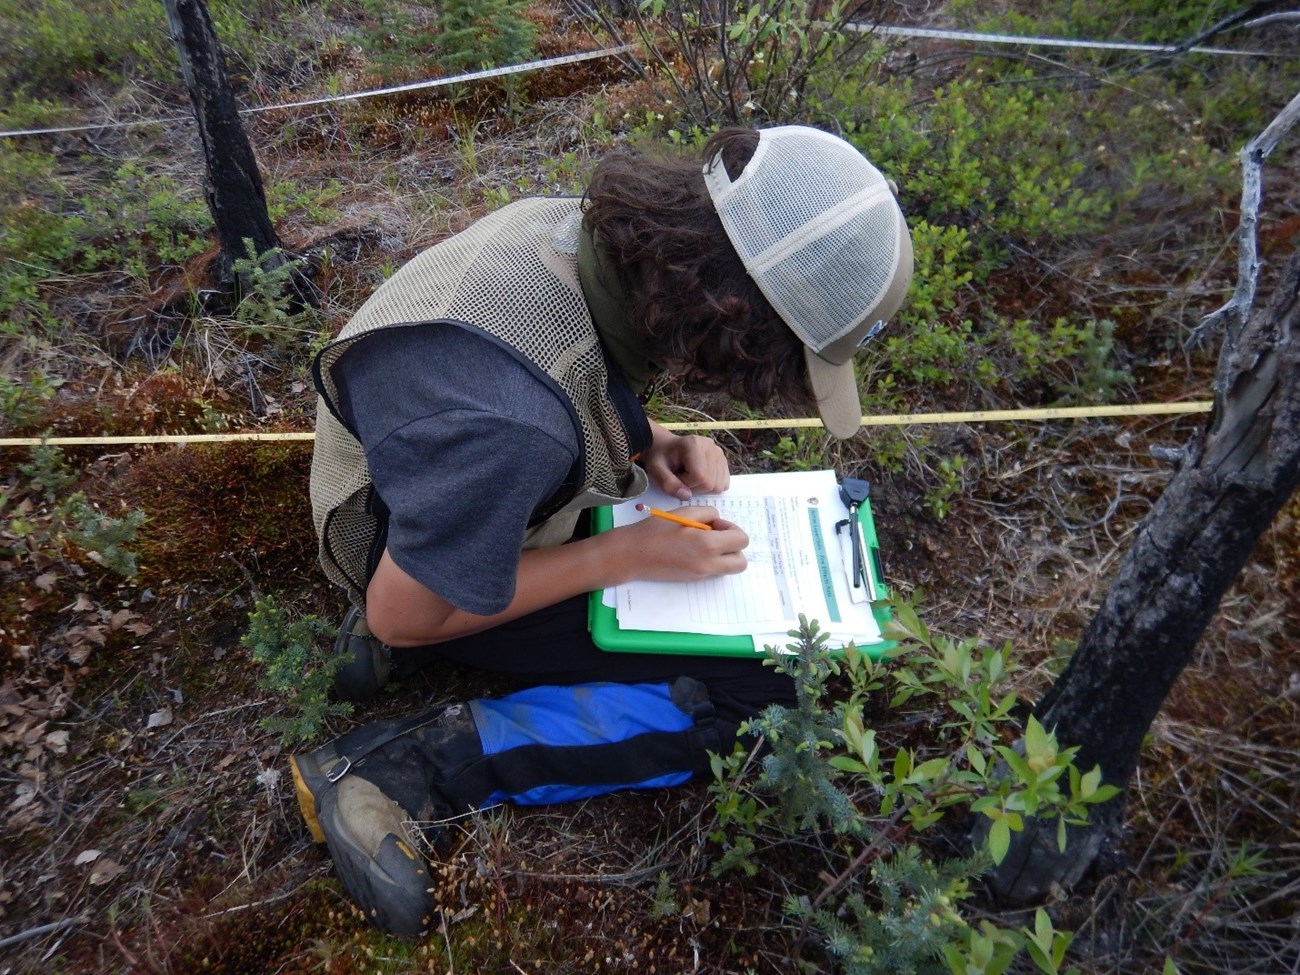 A student kneeling in vegetation records active layer depths on a clipboard.